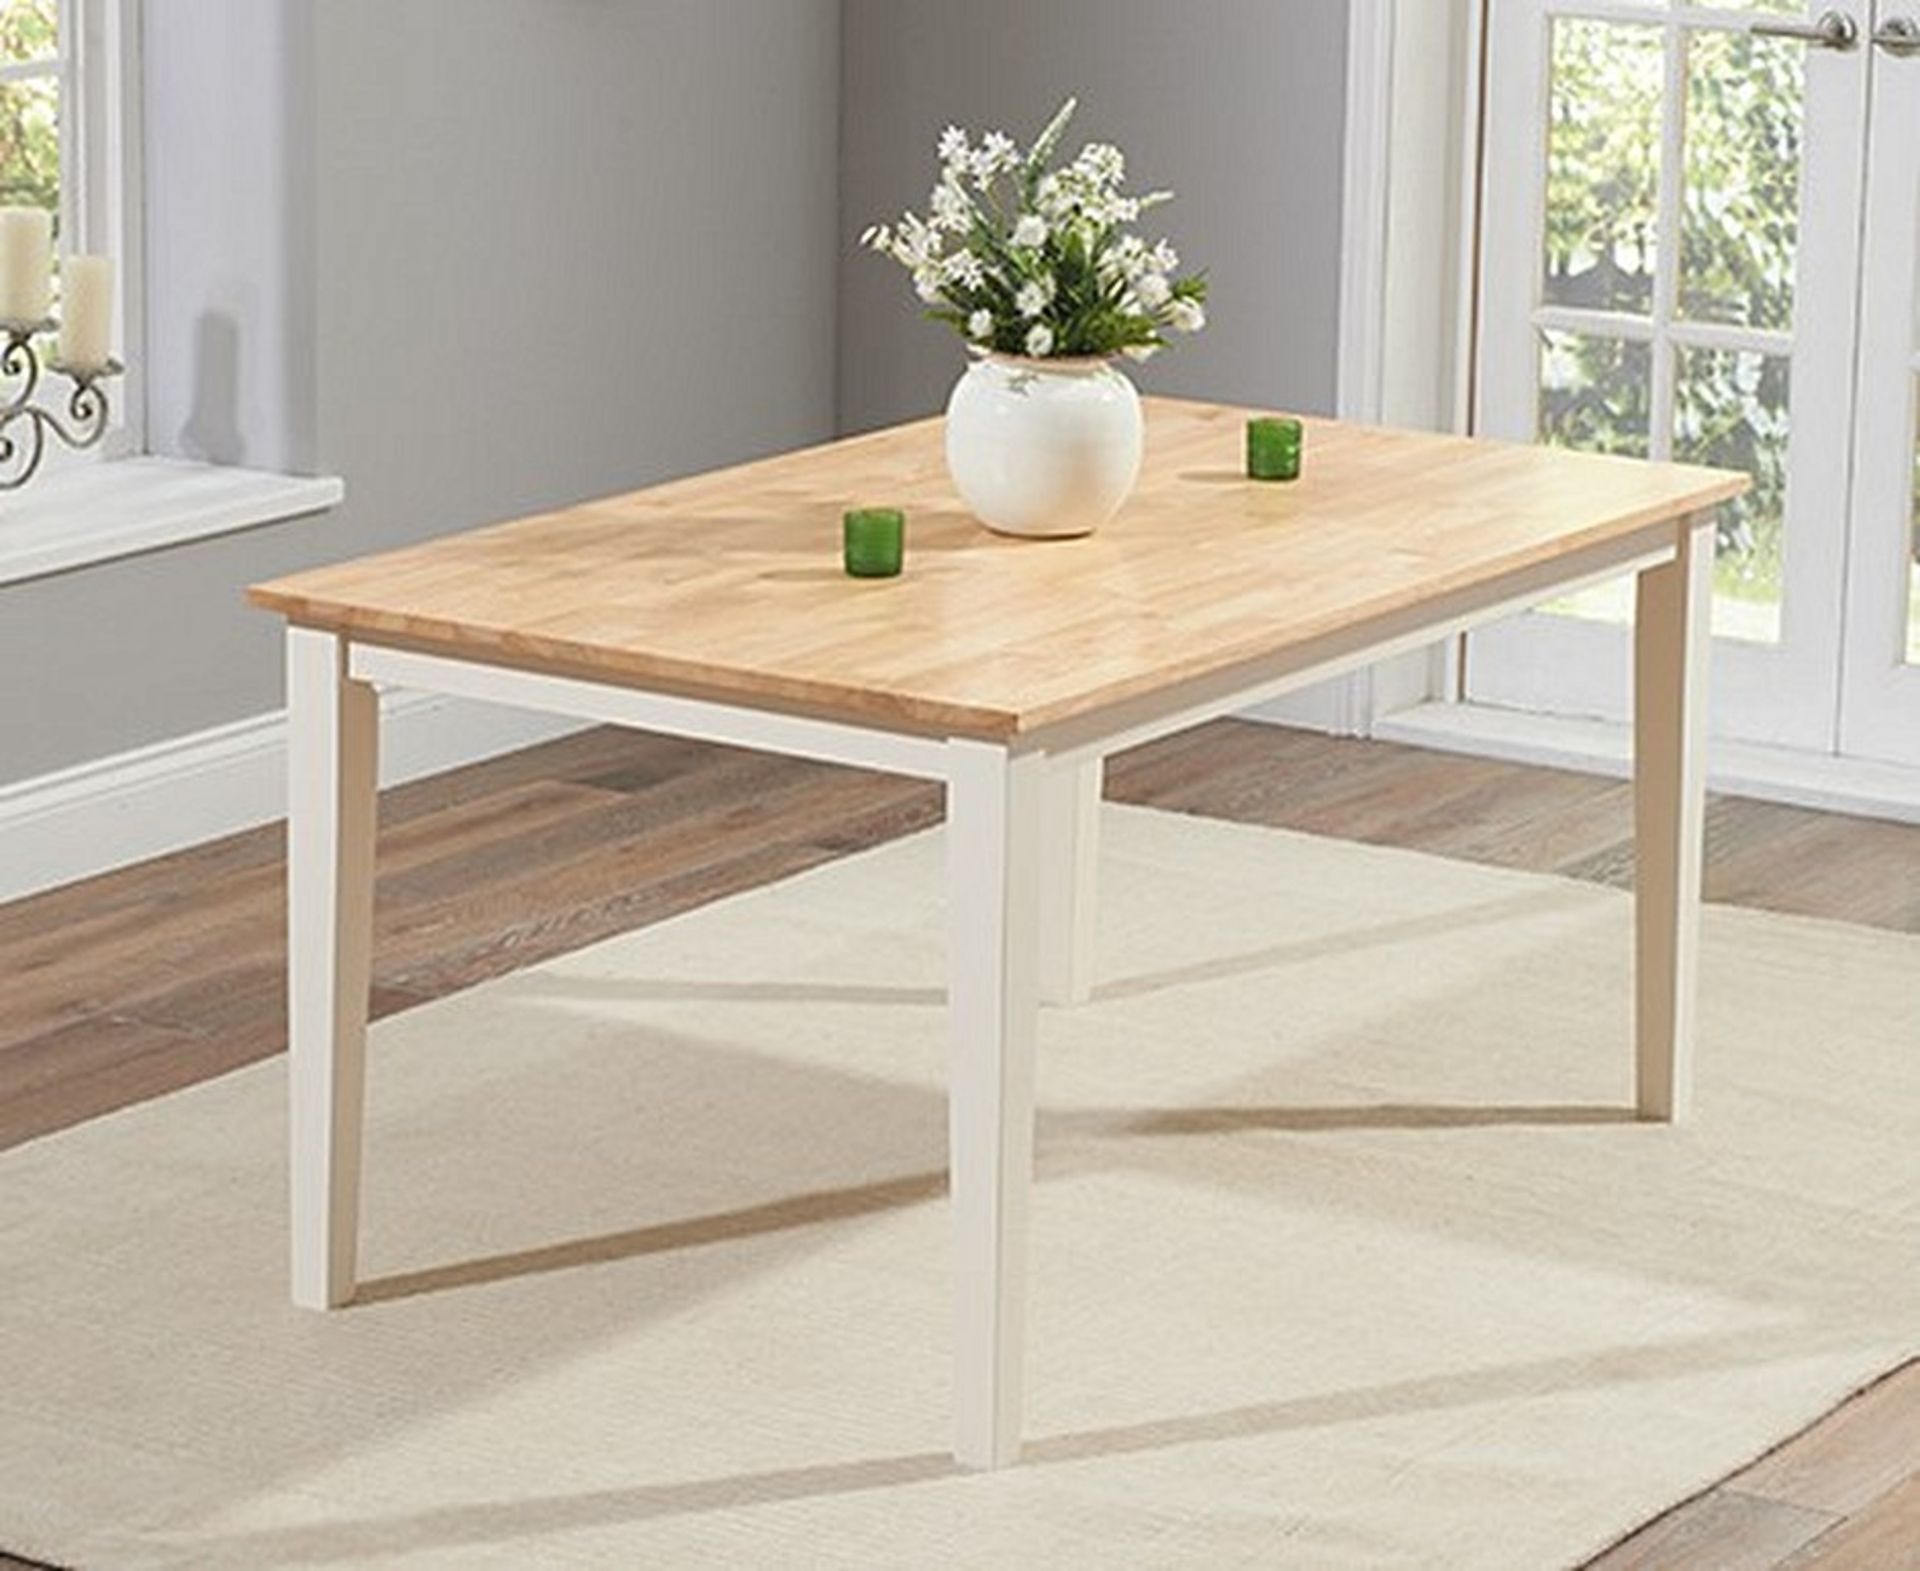 Chiltern 150cm Cream and Oak Dining Table The Chiltern collection is all about practicality and